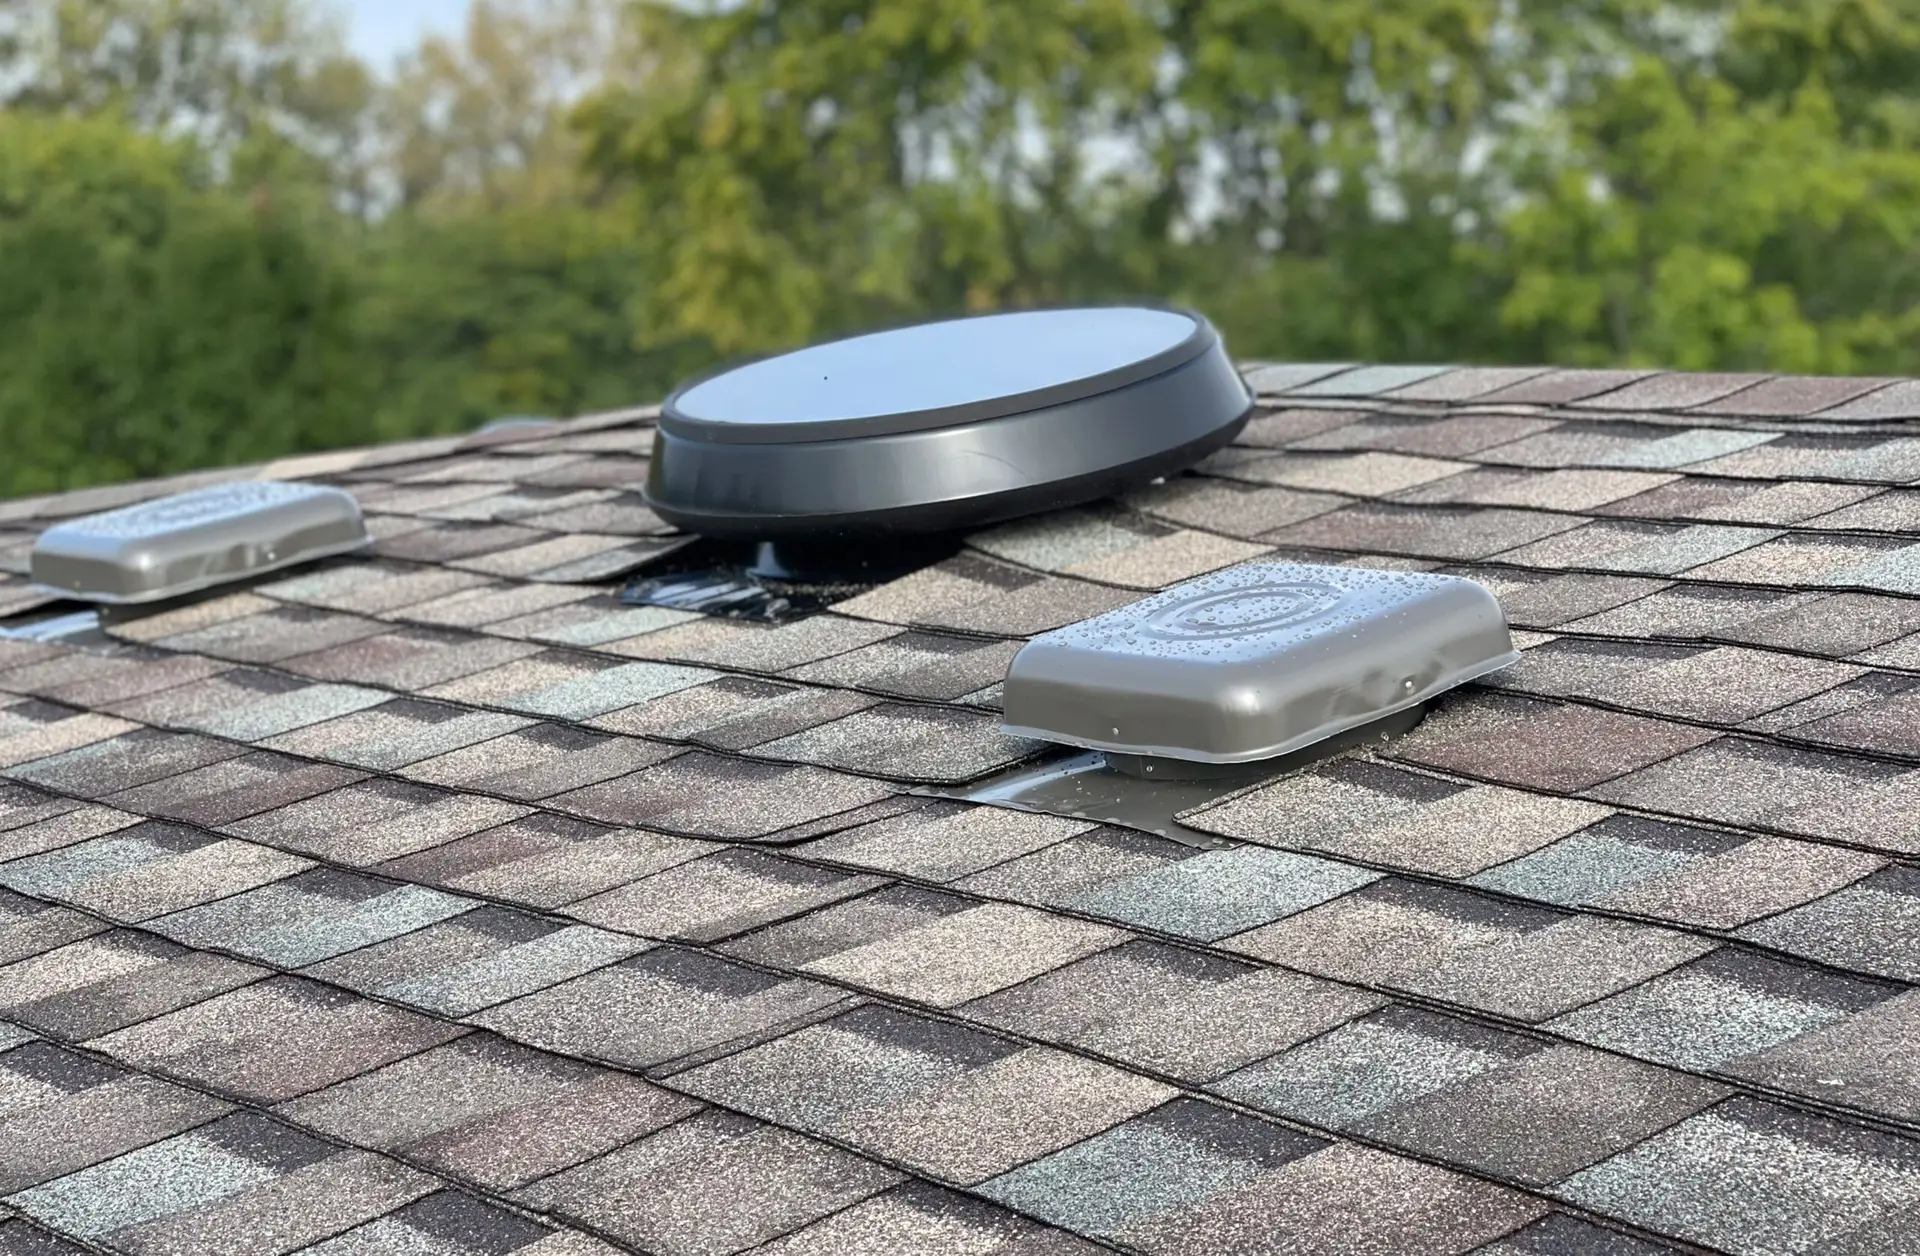 Comparing Roofing Material: Finding the Best for Your Home